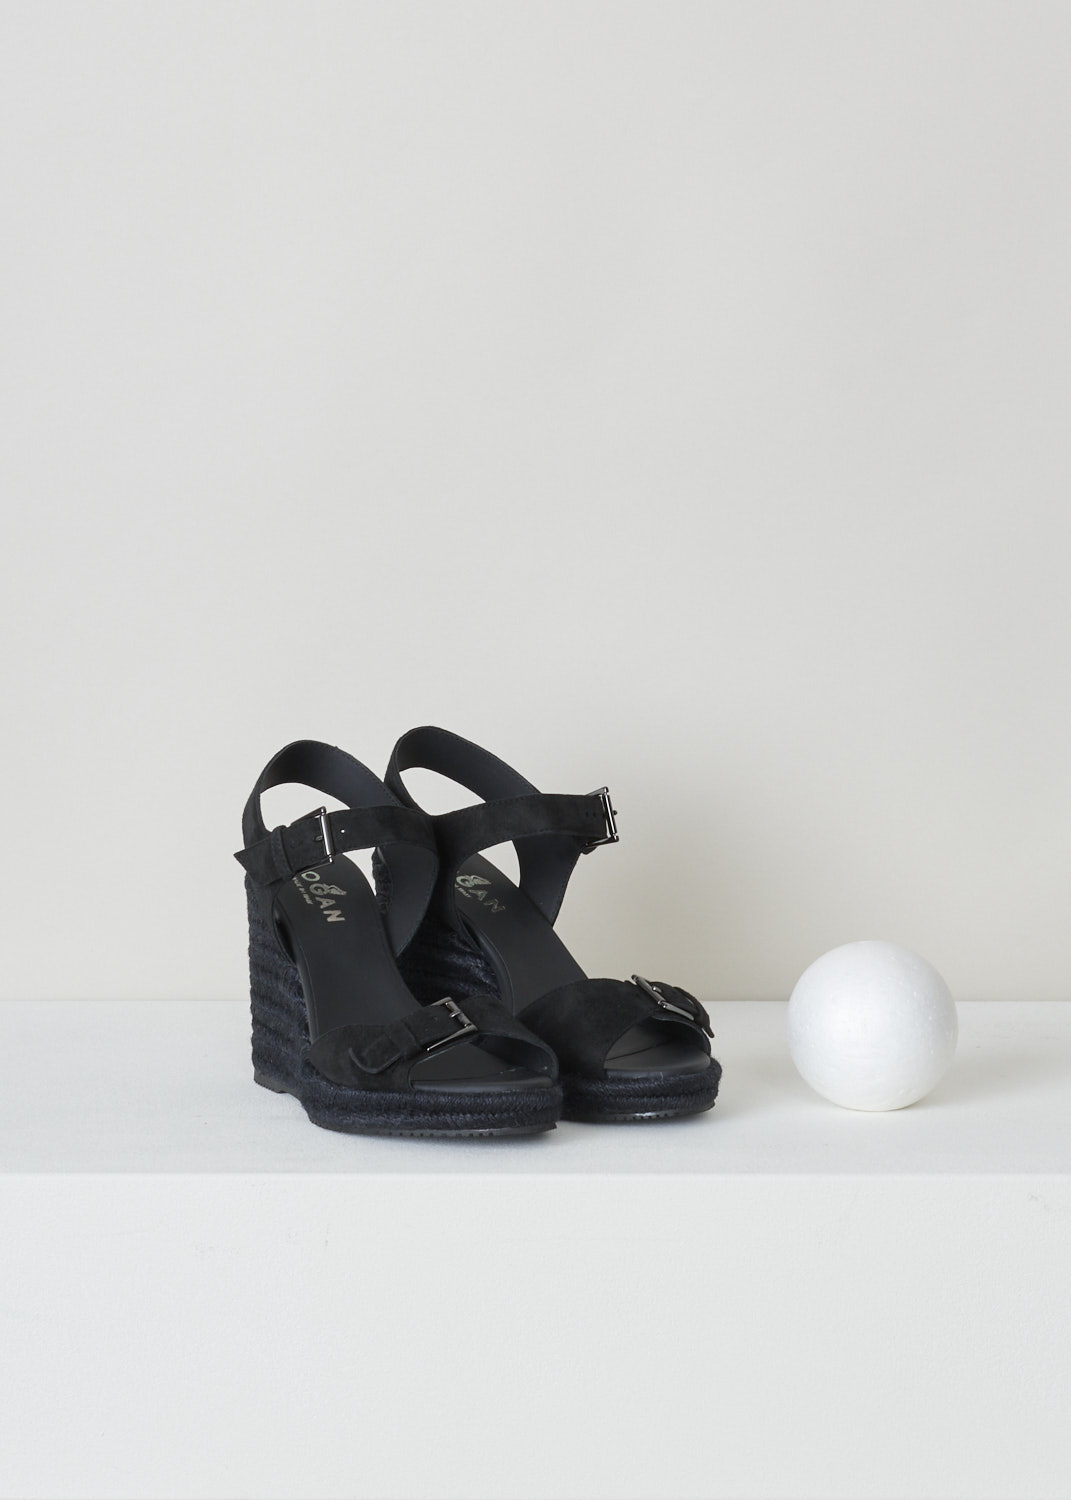 Hogan, Wedge heeled sandals, HXW5580DL20CR0B999_H558_CR0_nero, black silver, front, These lovely black wedge heeled sandals fills us all with summer vibes. Featuring a single strap over the vamp with an ornamental buckle also coloured black. The ankle strap however, has a functional buckle, it is coloured black and acts as your fastening option. 

Heel height: 11 cm / 4.3 inch. 